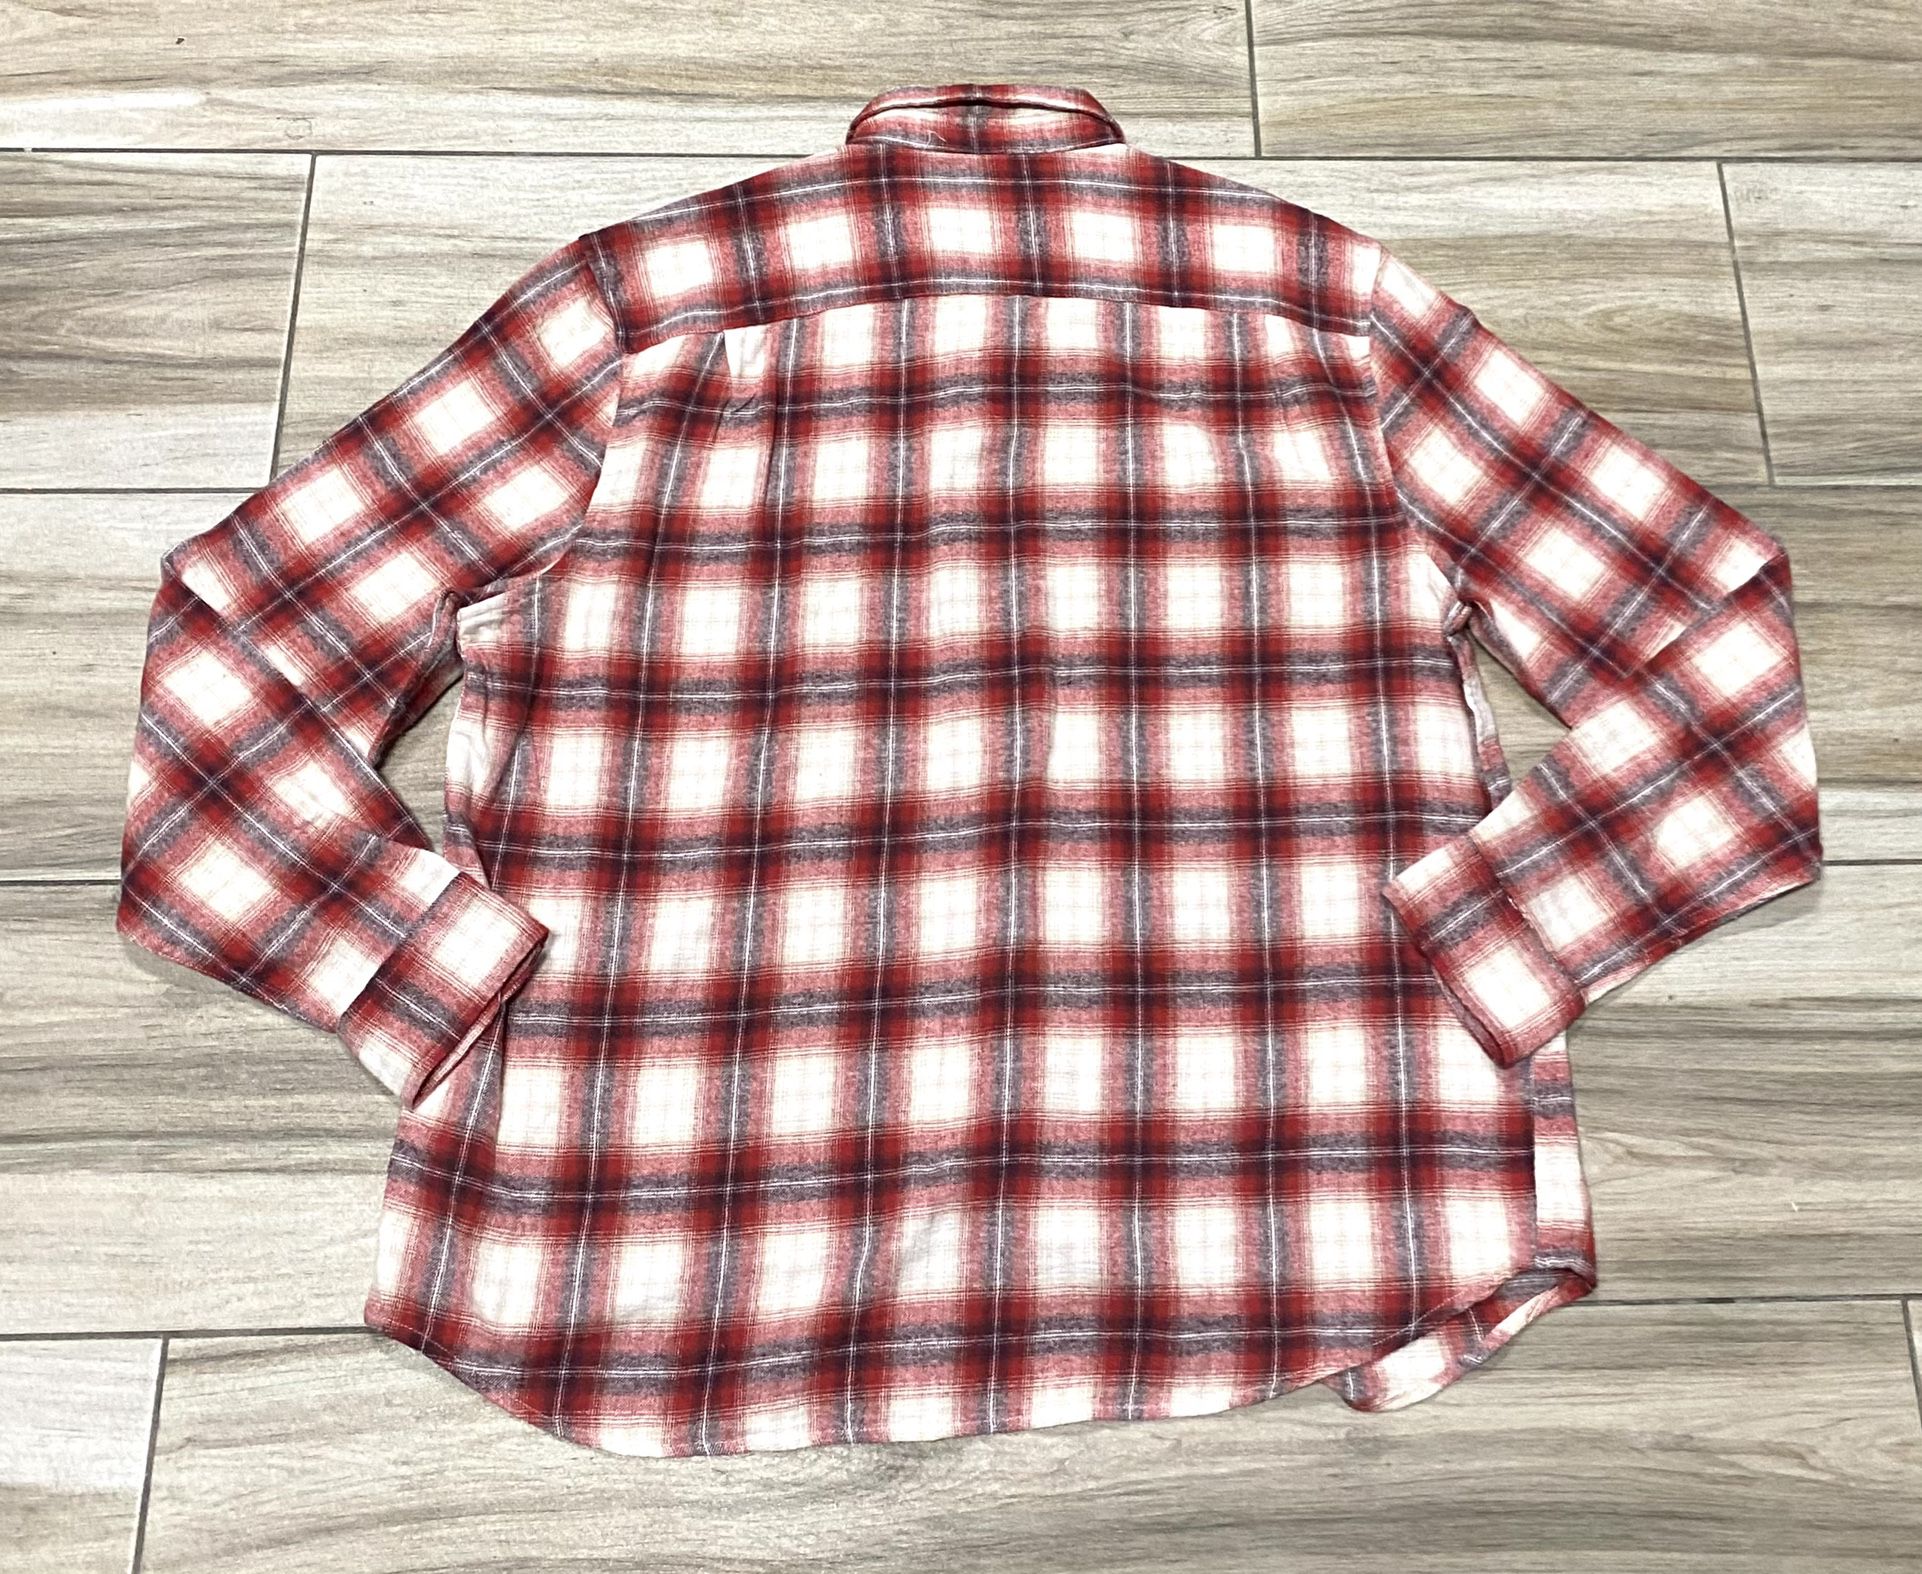 Lucky Brand Woven Casual Button Down Red Plaid Shirt Classic Fit Mens 2XL New